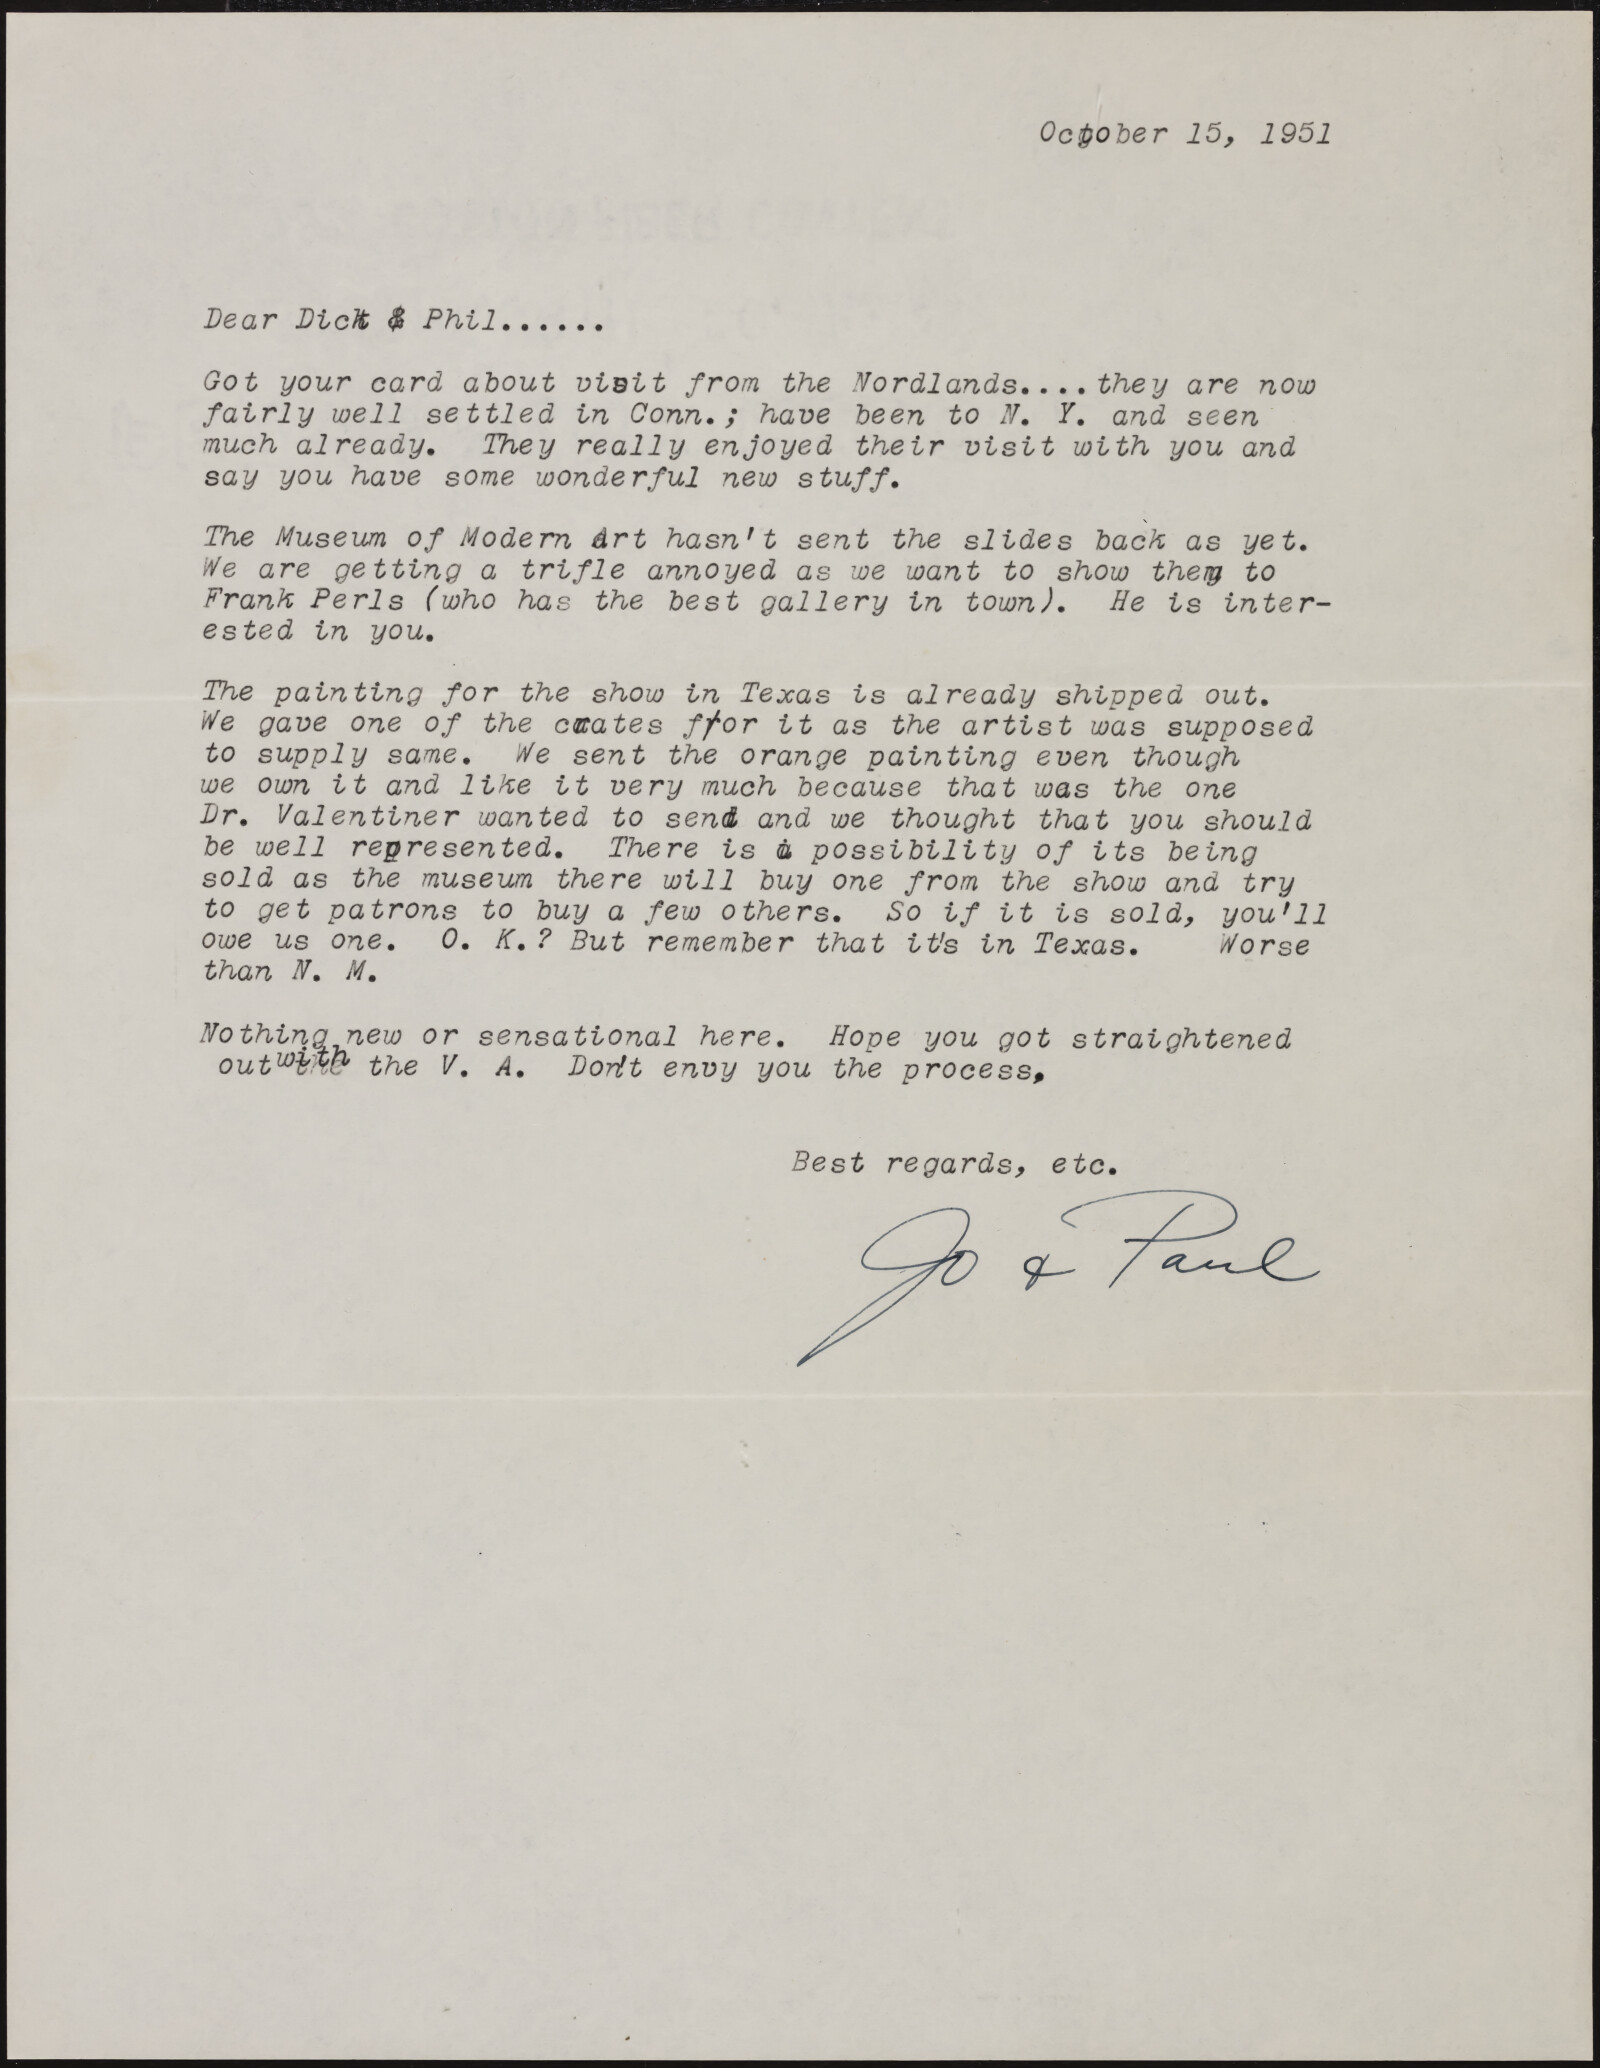 Correspondence from Josephine “Jo” Kantor (later Morris) and Paul Kantor to Richard and Phyllis Diebenkorn